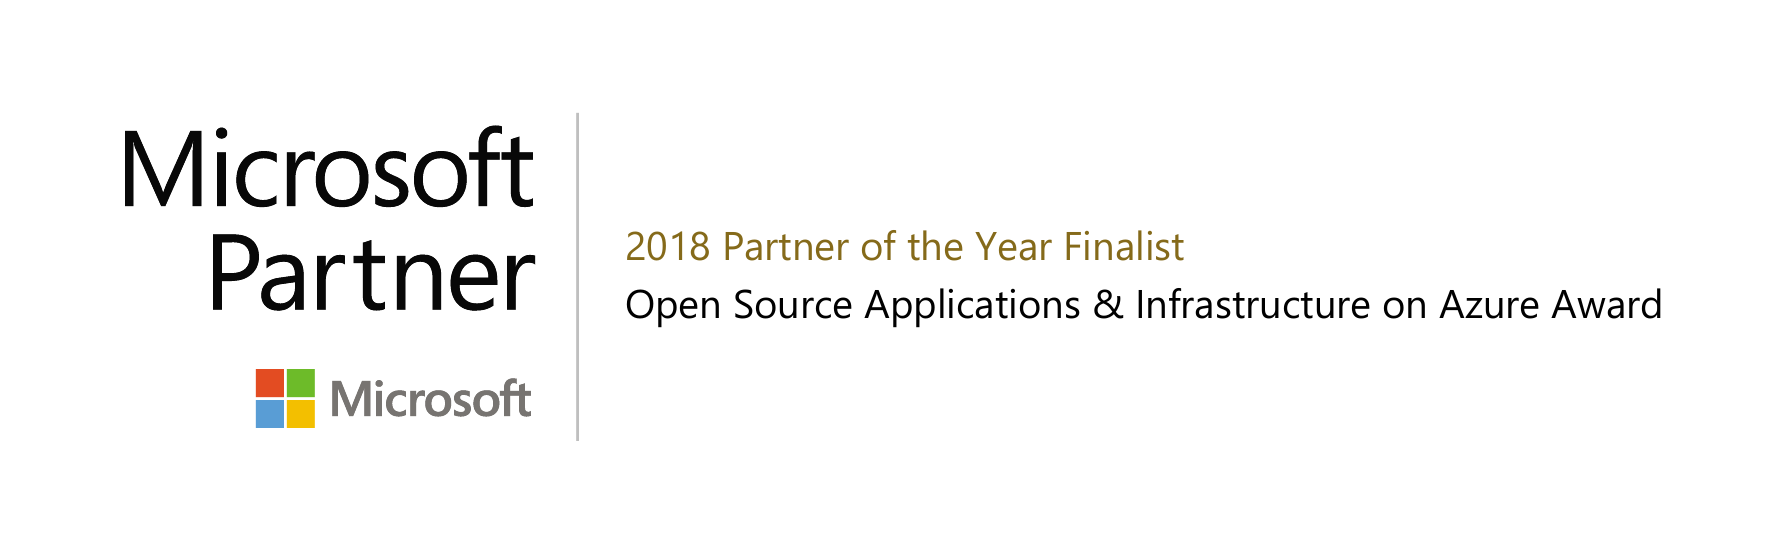 SNP Technologies recognized as a finalist for  Microsoft 2018 Partner of the Year Awards for Open Source Applications & Infrastructure on Azure Award